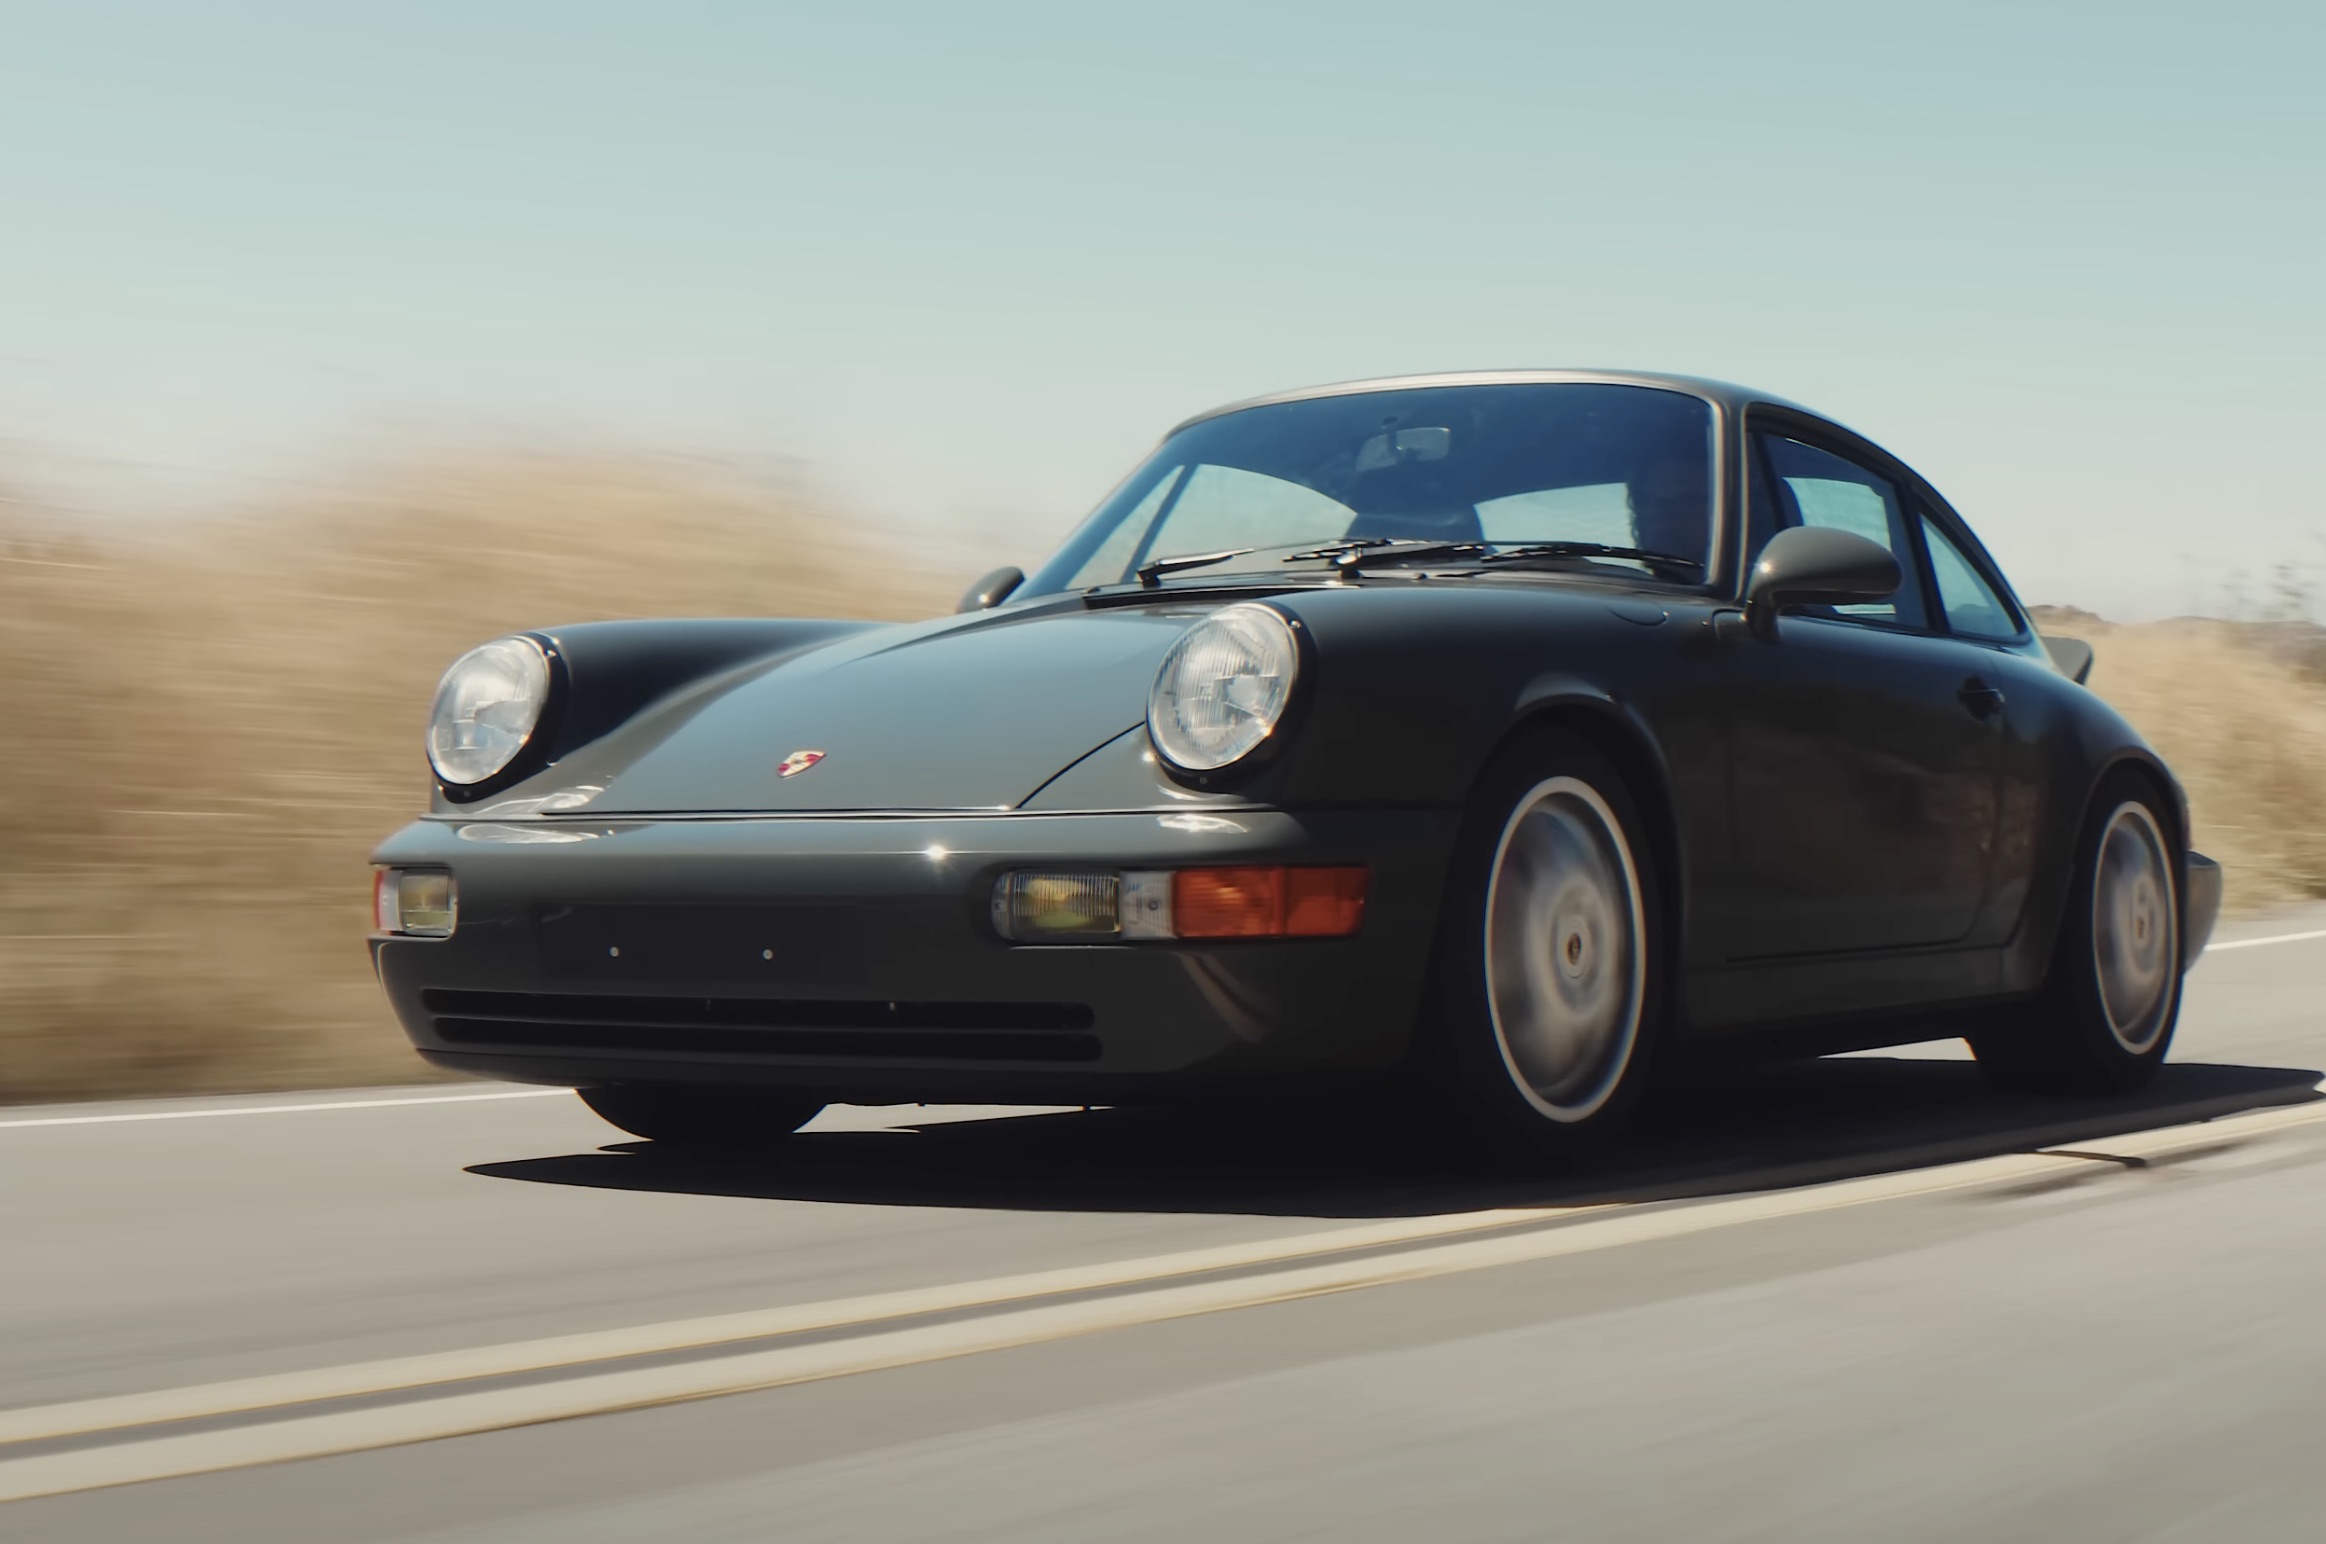 Is this the world's best restomod 911? Henry Catchpole aims to find out